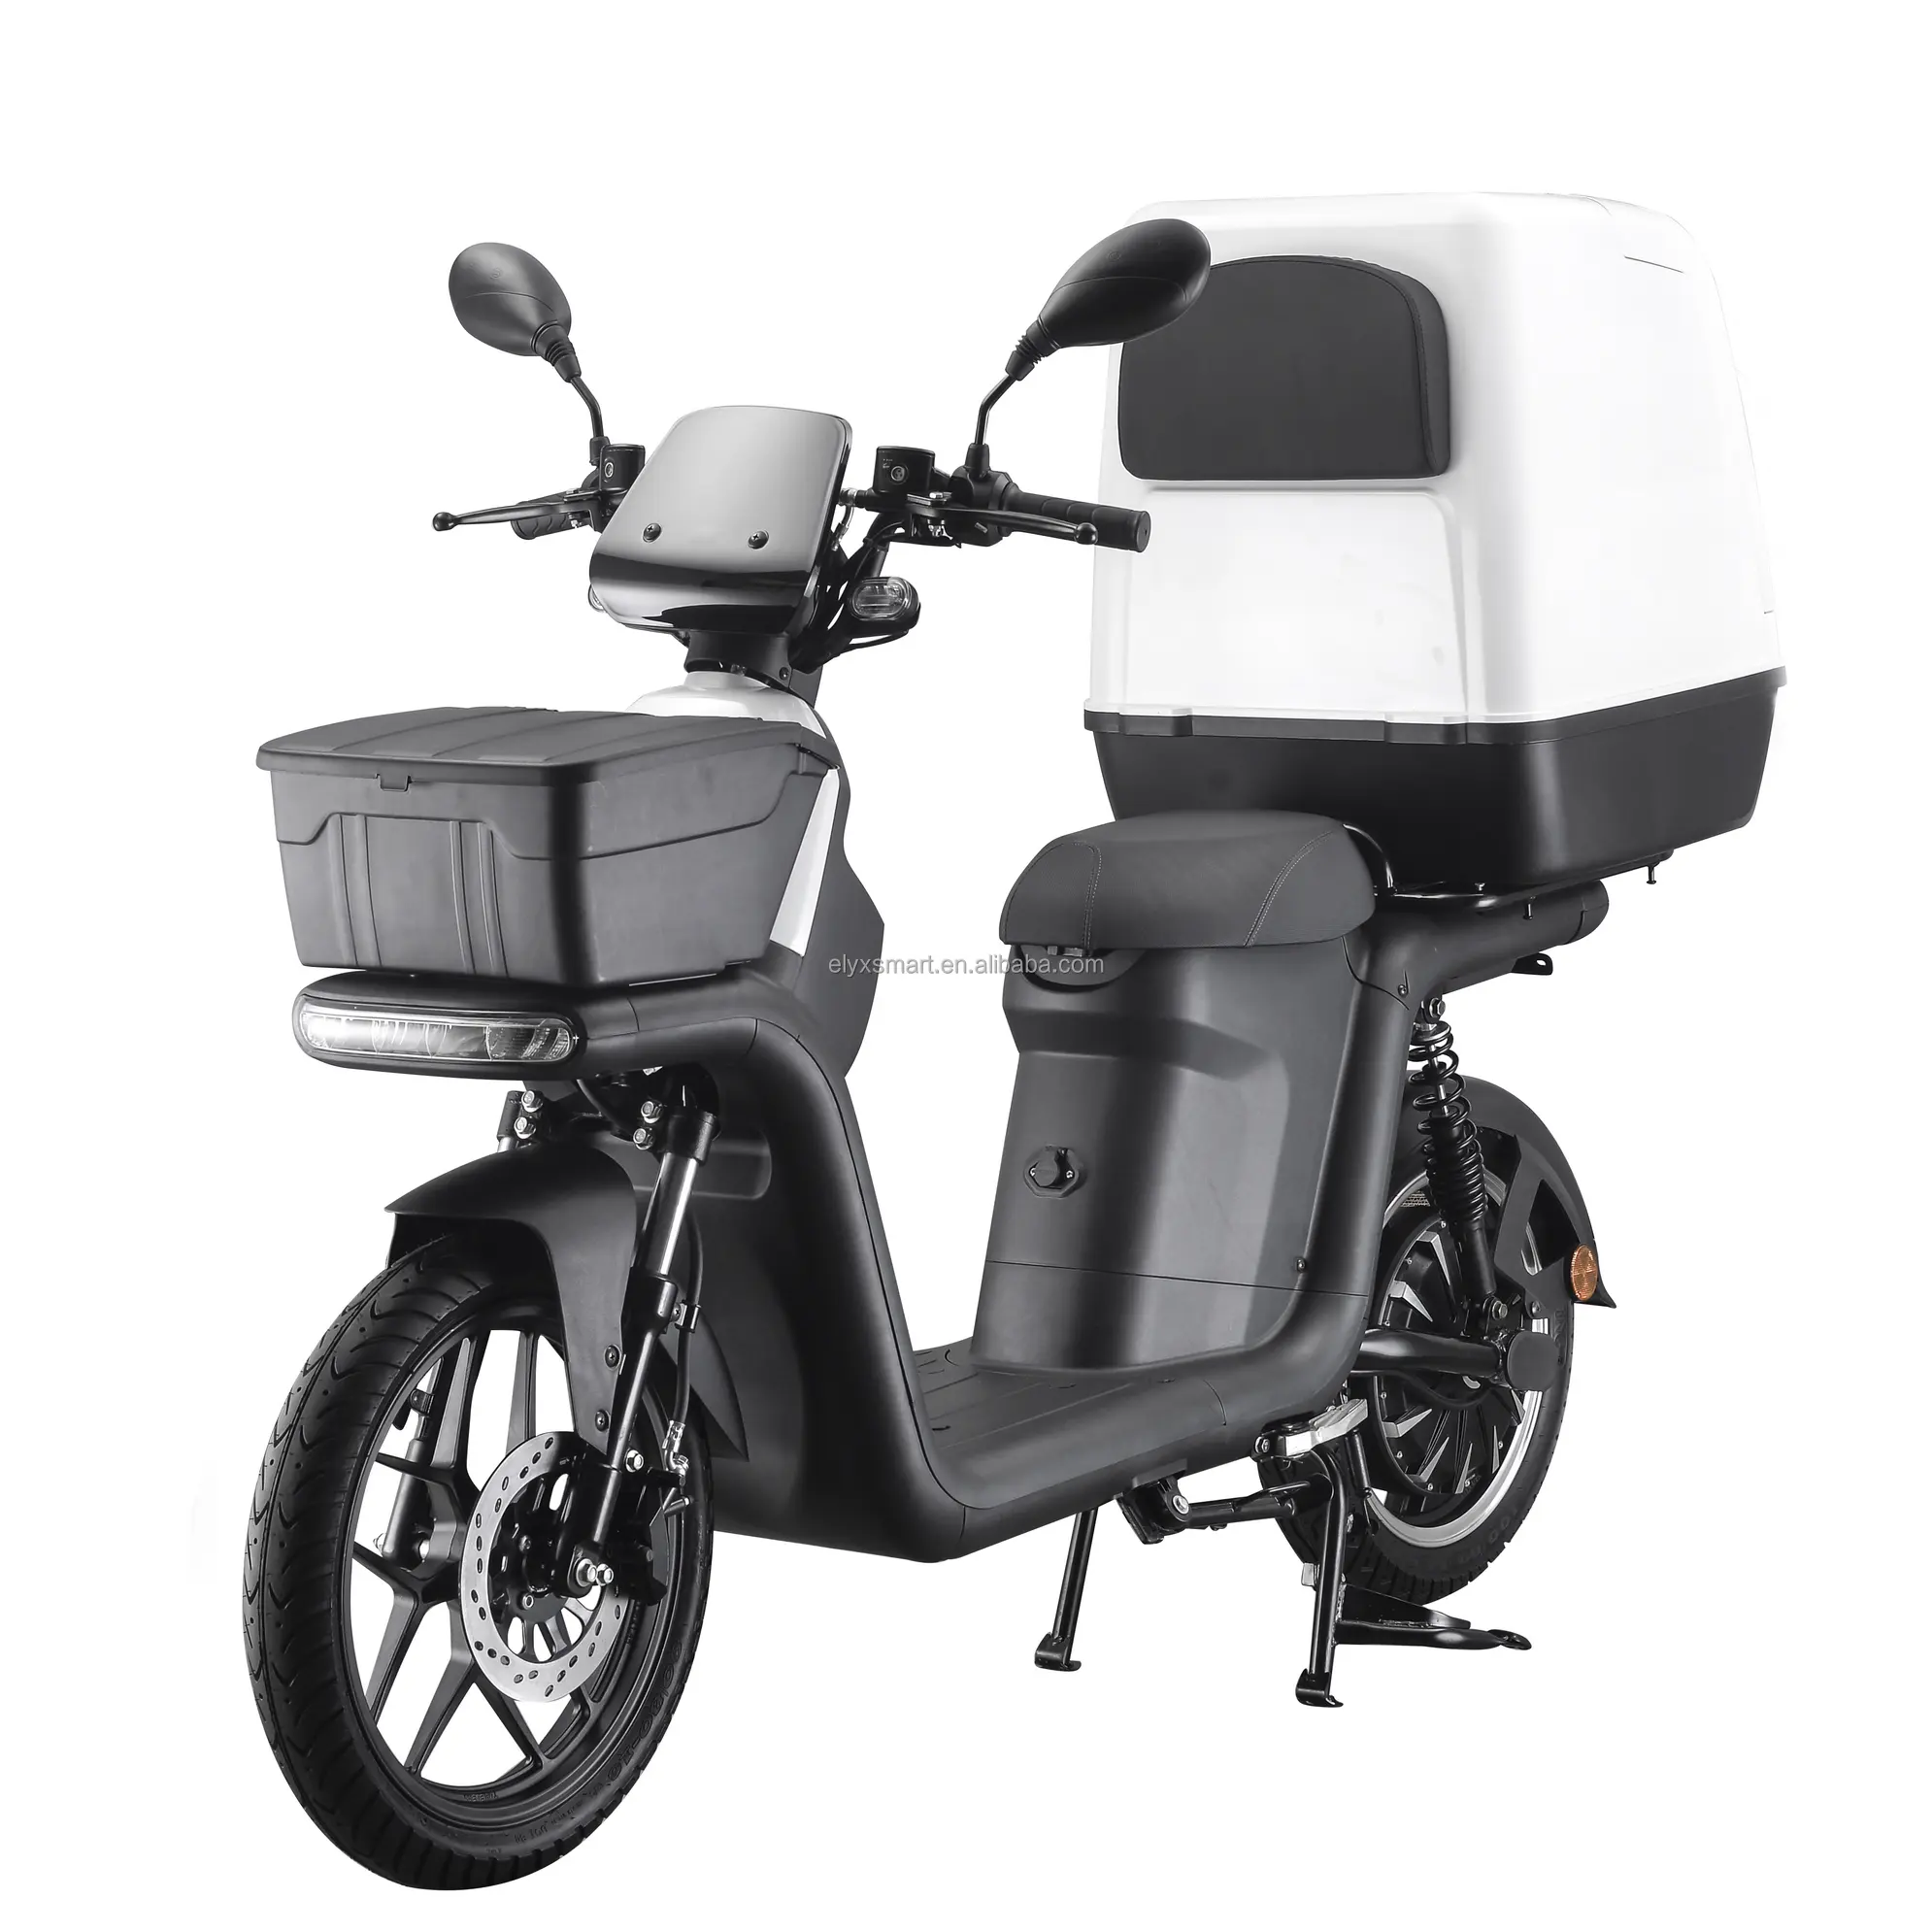 2022 New Eats Cargo Box Scooter Electric Motorcycle 2000W Adult Use Lithium Battery Powerful Electric Motorcycle Scooters